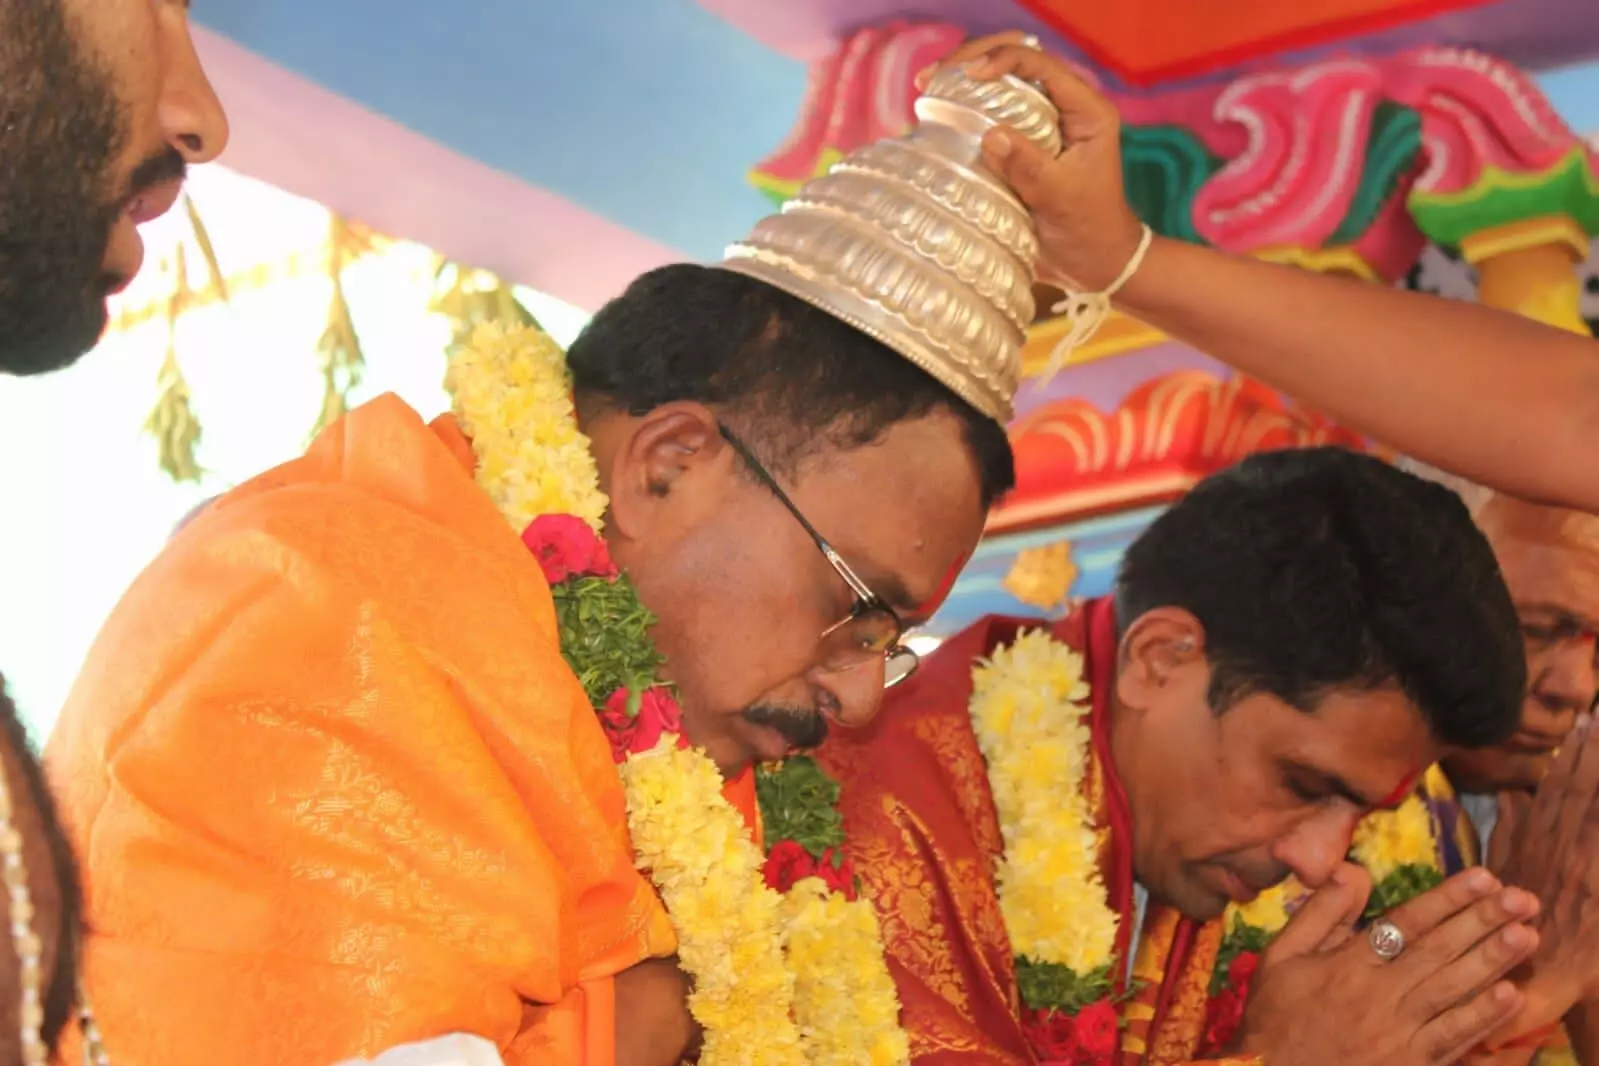 Congress parliamentary candidate Malluravi visited the Vattem temple